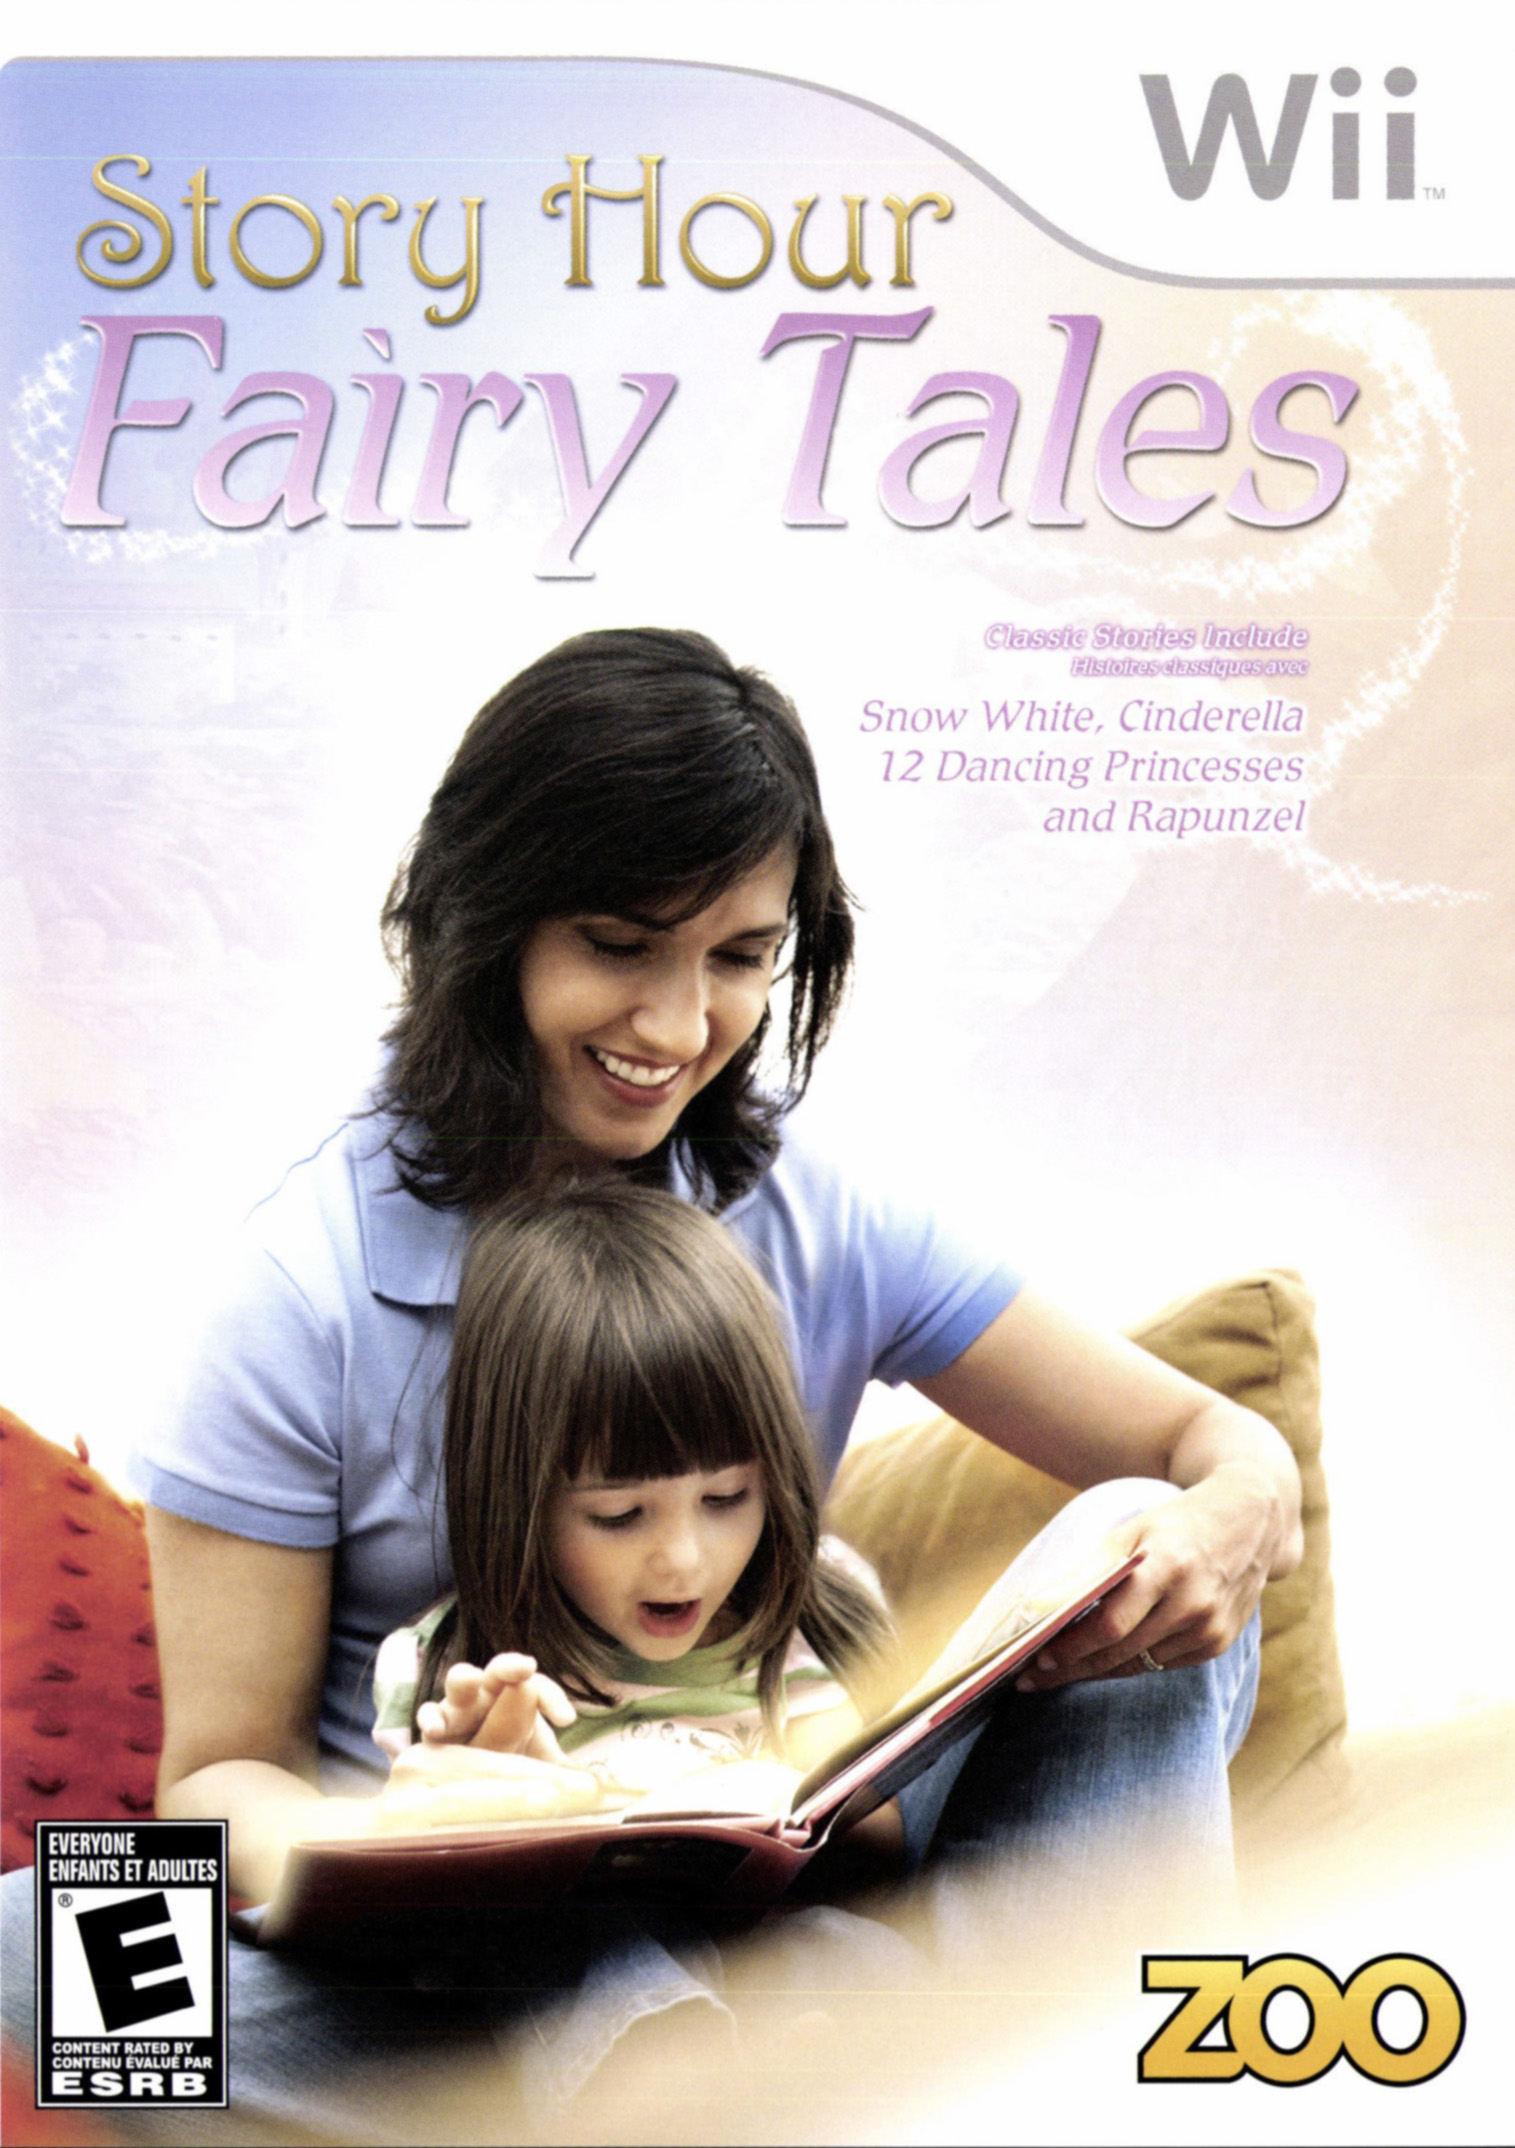 Story Hour: Fairy Tales (Application) - image 1 of 2